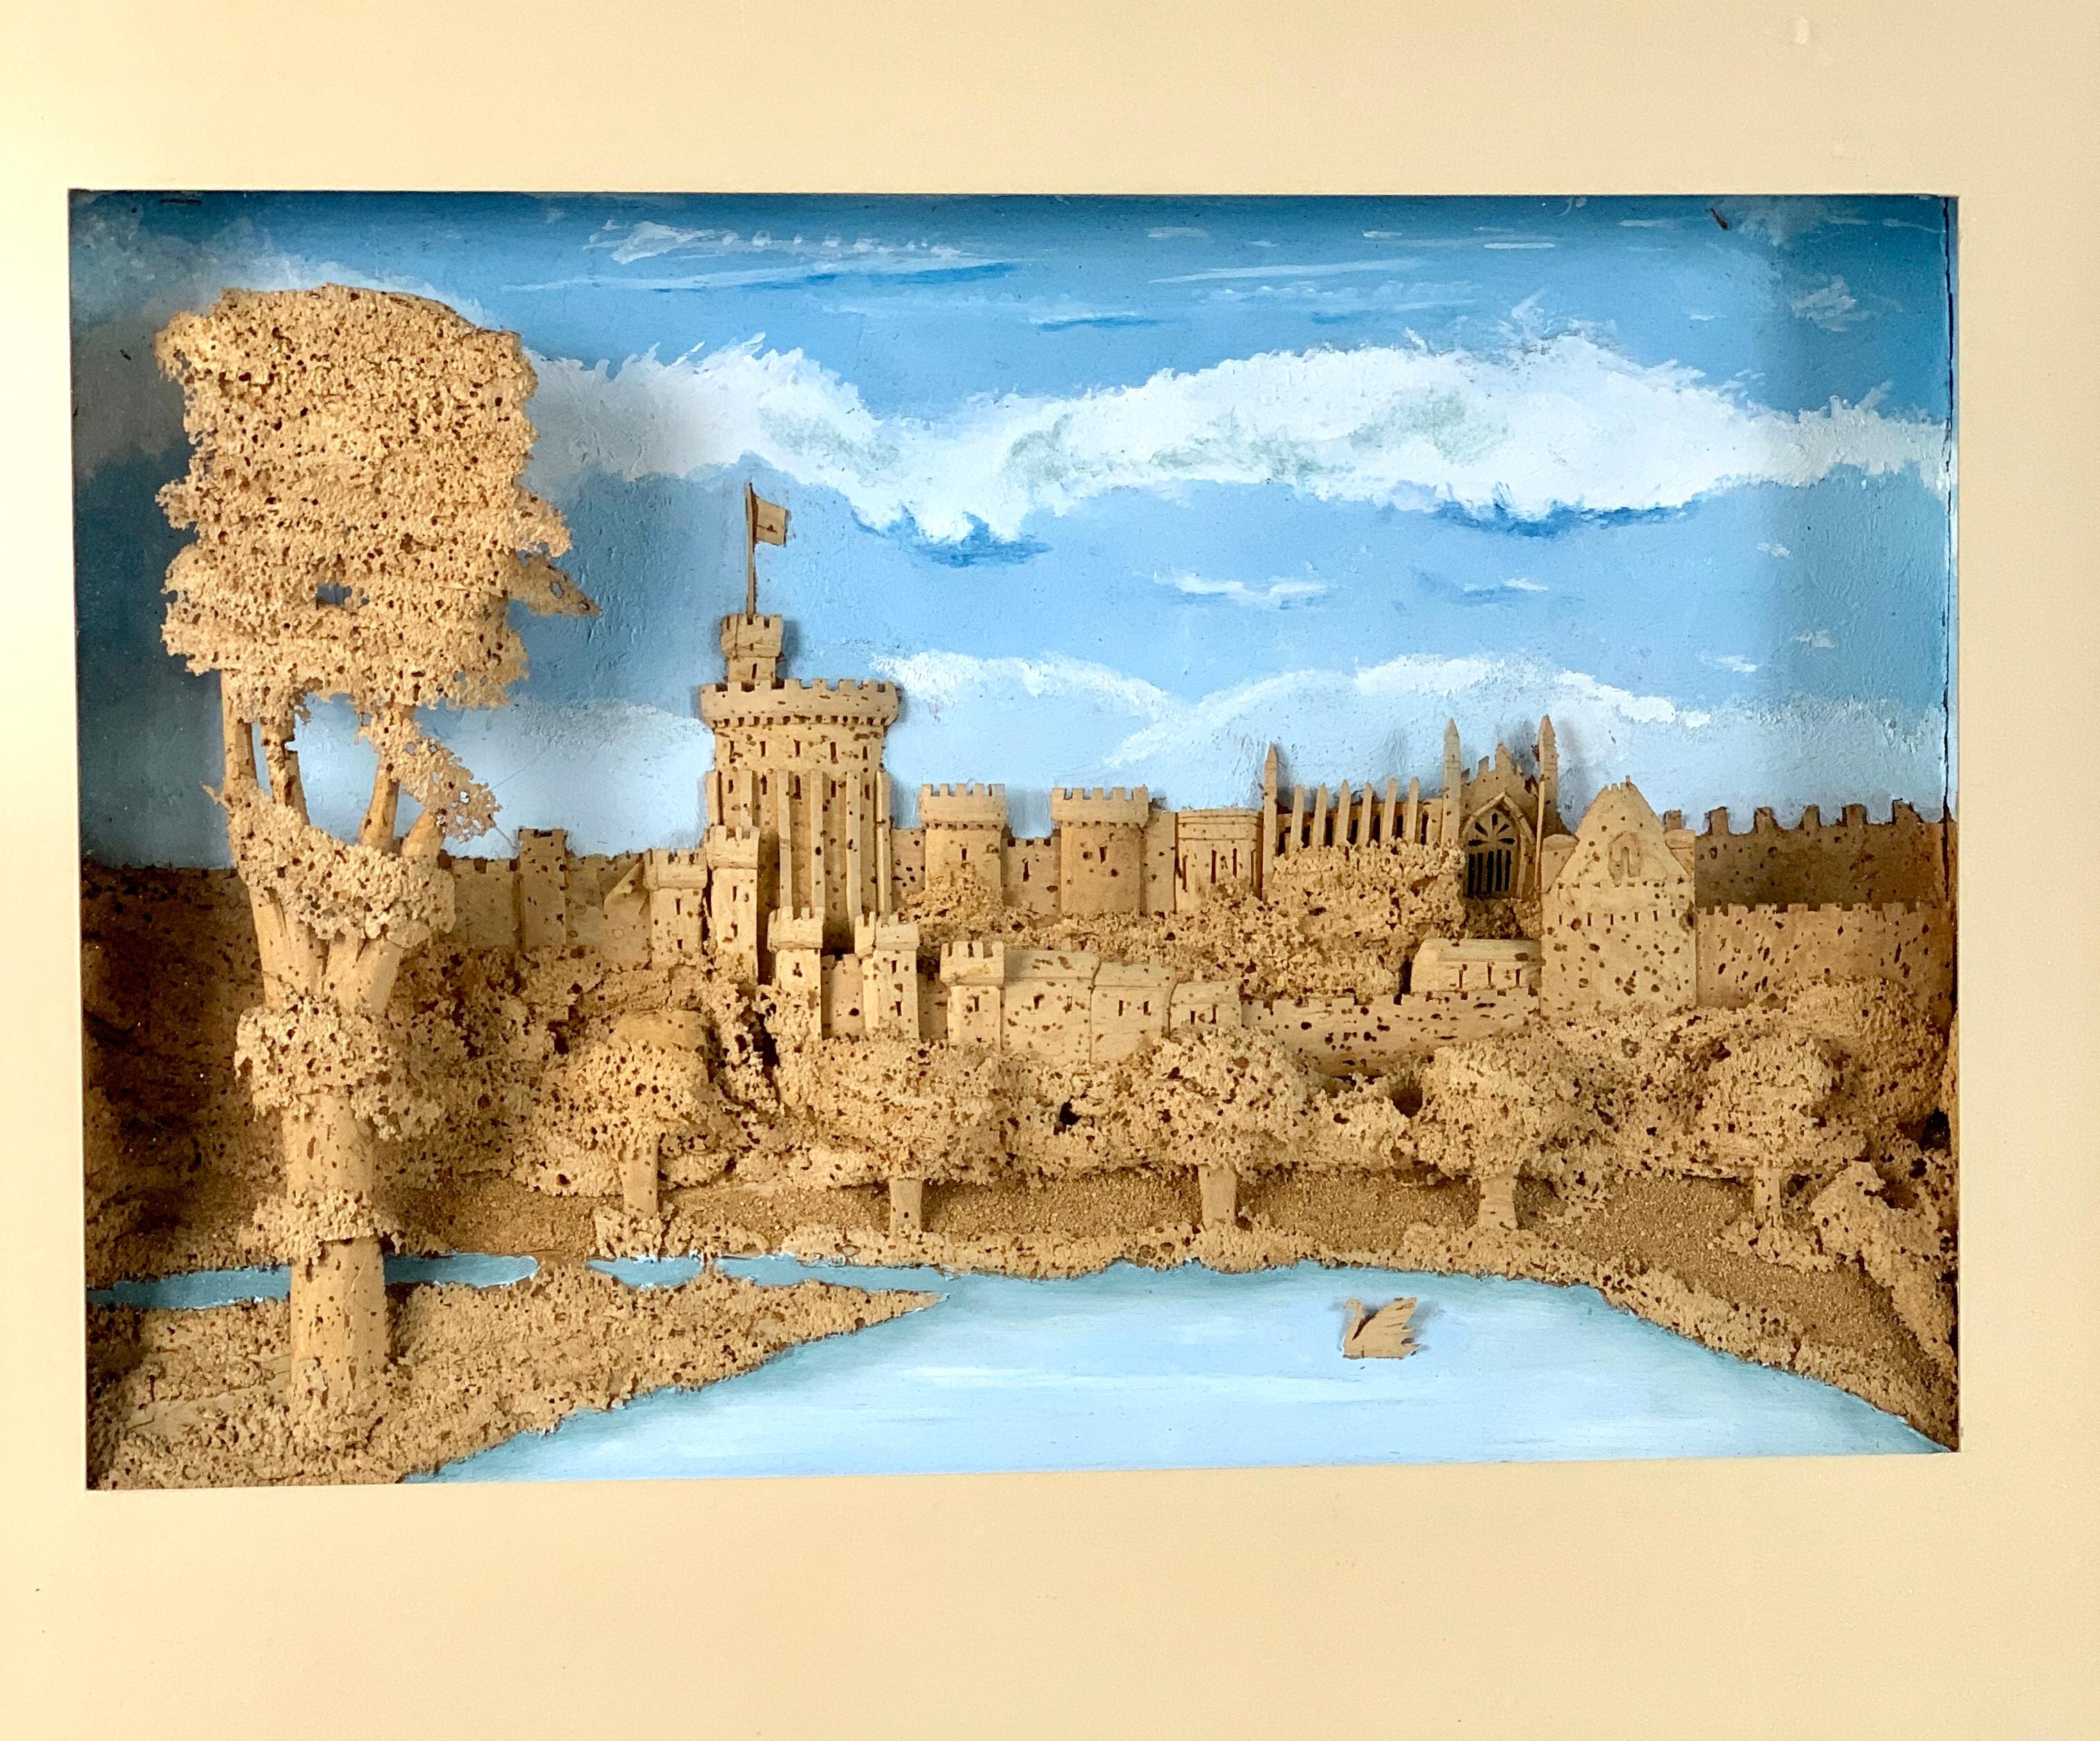  This hand crafted cork work shows a romantic scene of an ancient castle in a charming diorama. The castle is perched atop a promontory overlooking a river, complete with forested terrain and a tiny swan. The artist's intricate cutting and piercing